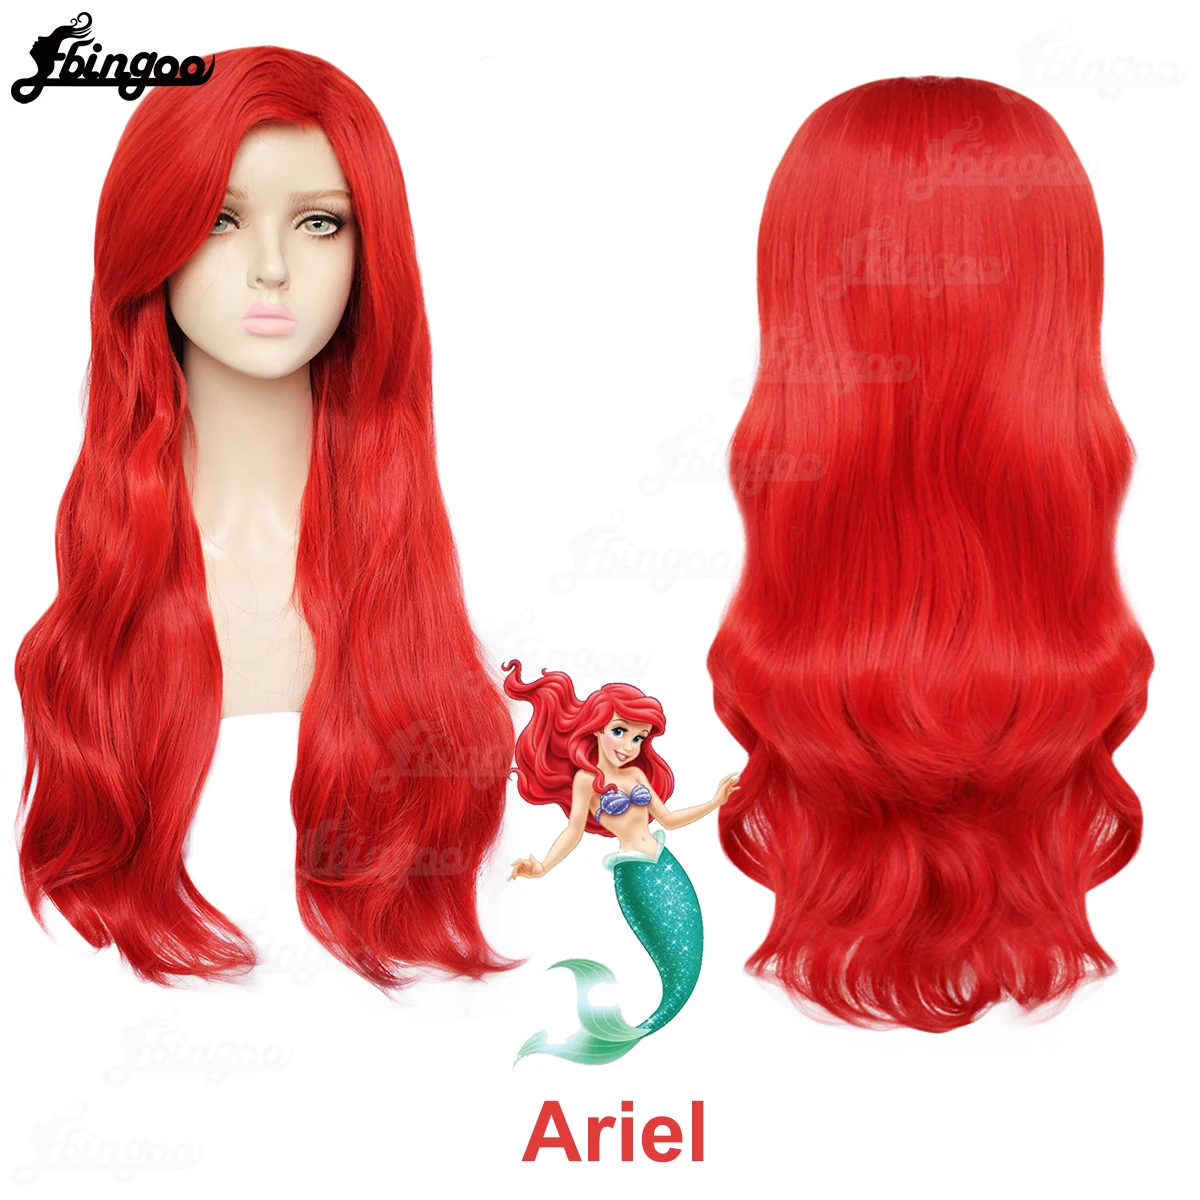 Ebingoo The Little Mermaid Princess Ariel Cosplay Wig Red Long Body Wave Wavy Synthetic Wigs for Halloween Costume Party